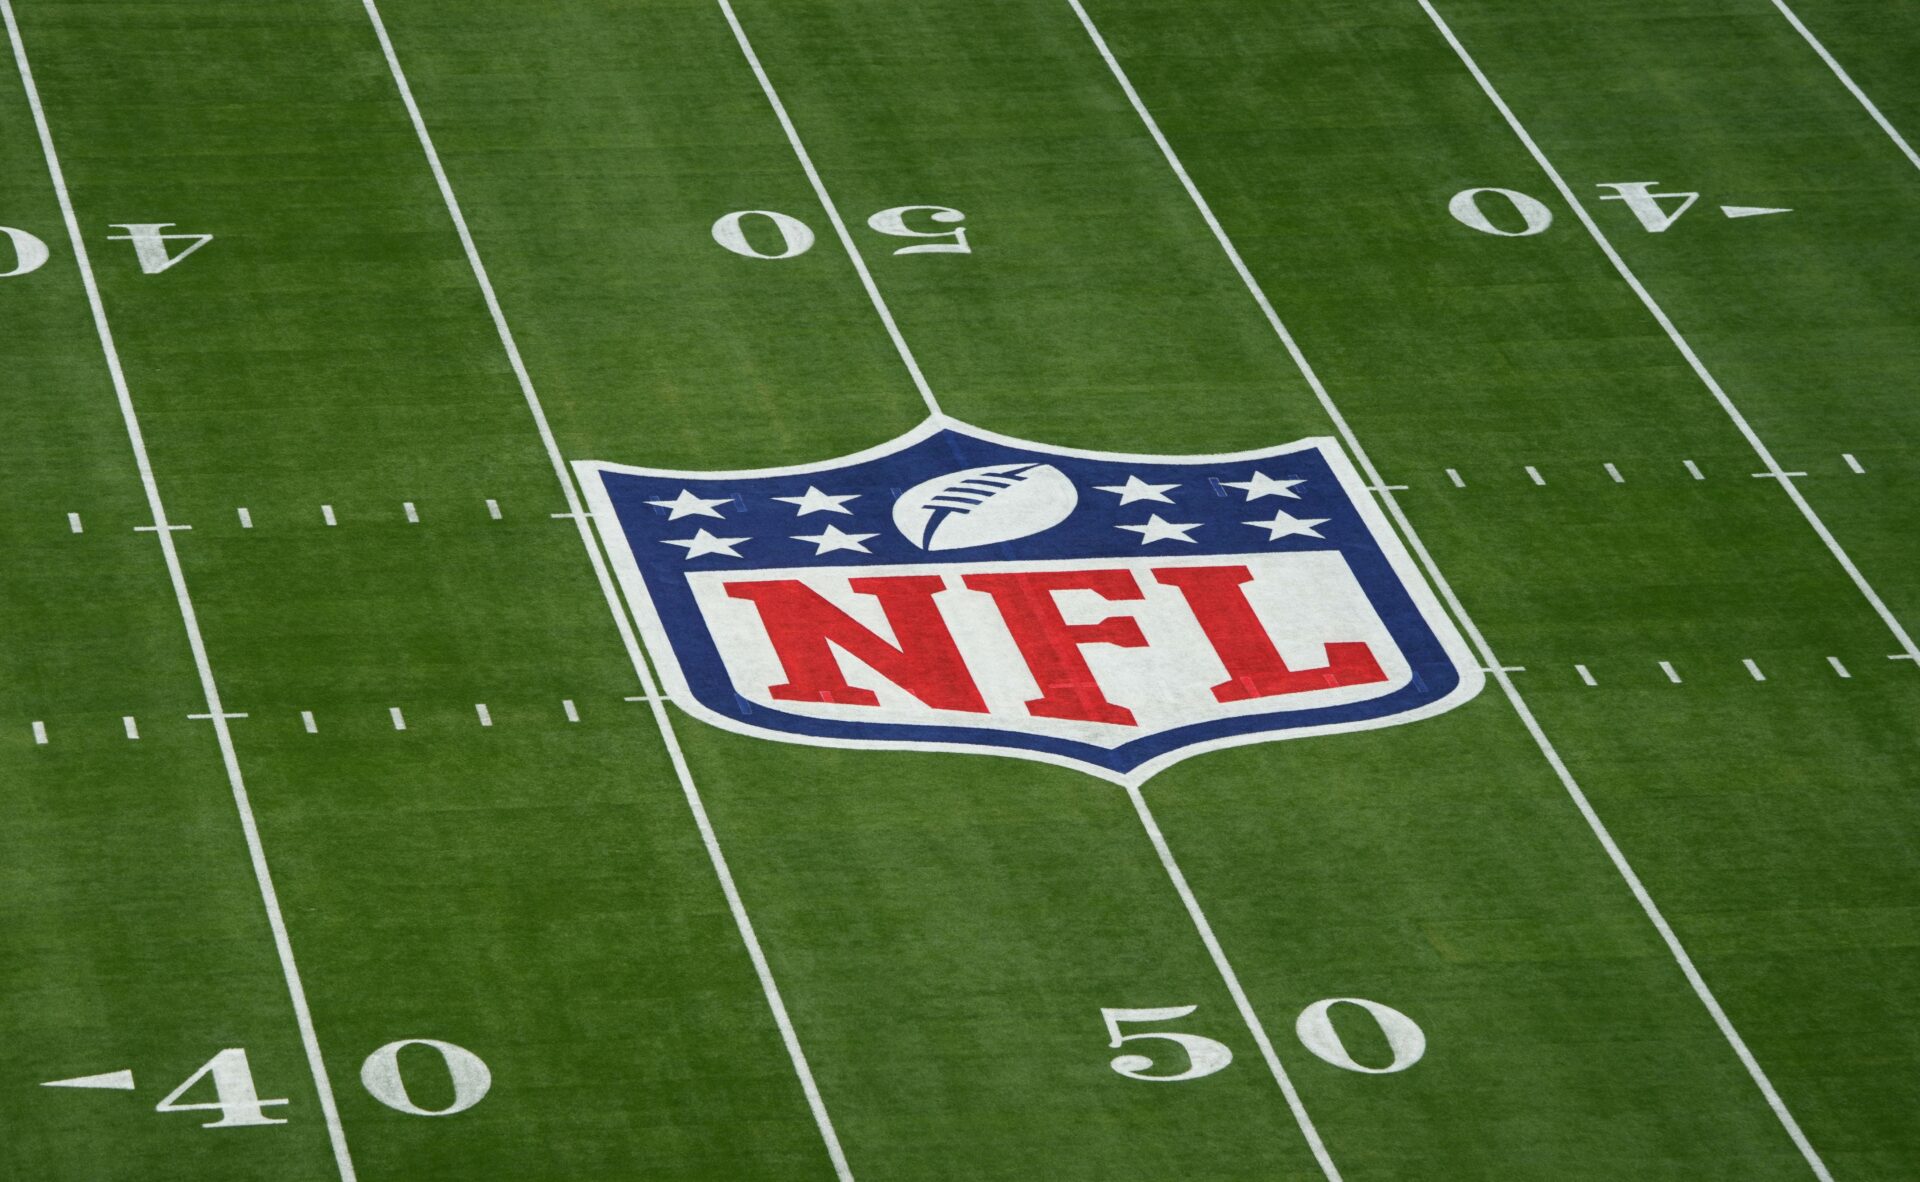 A general view of the NFL logo on the field.